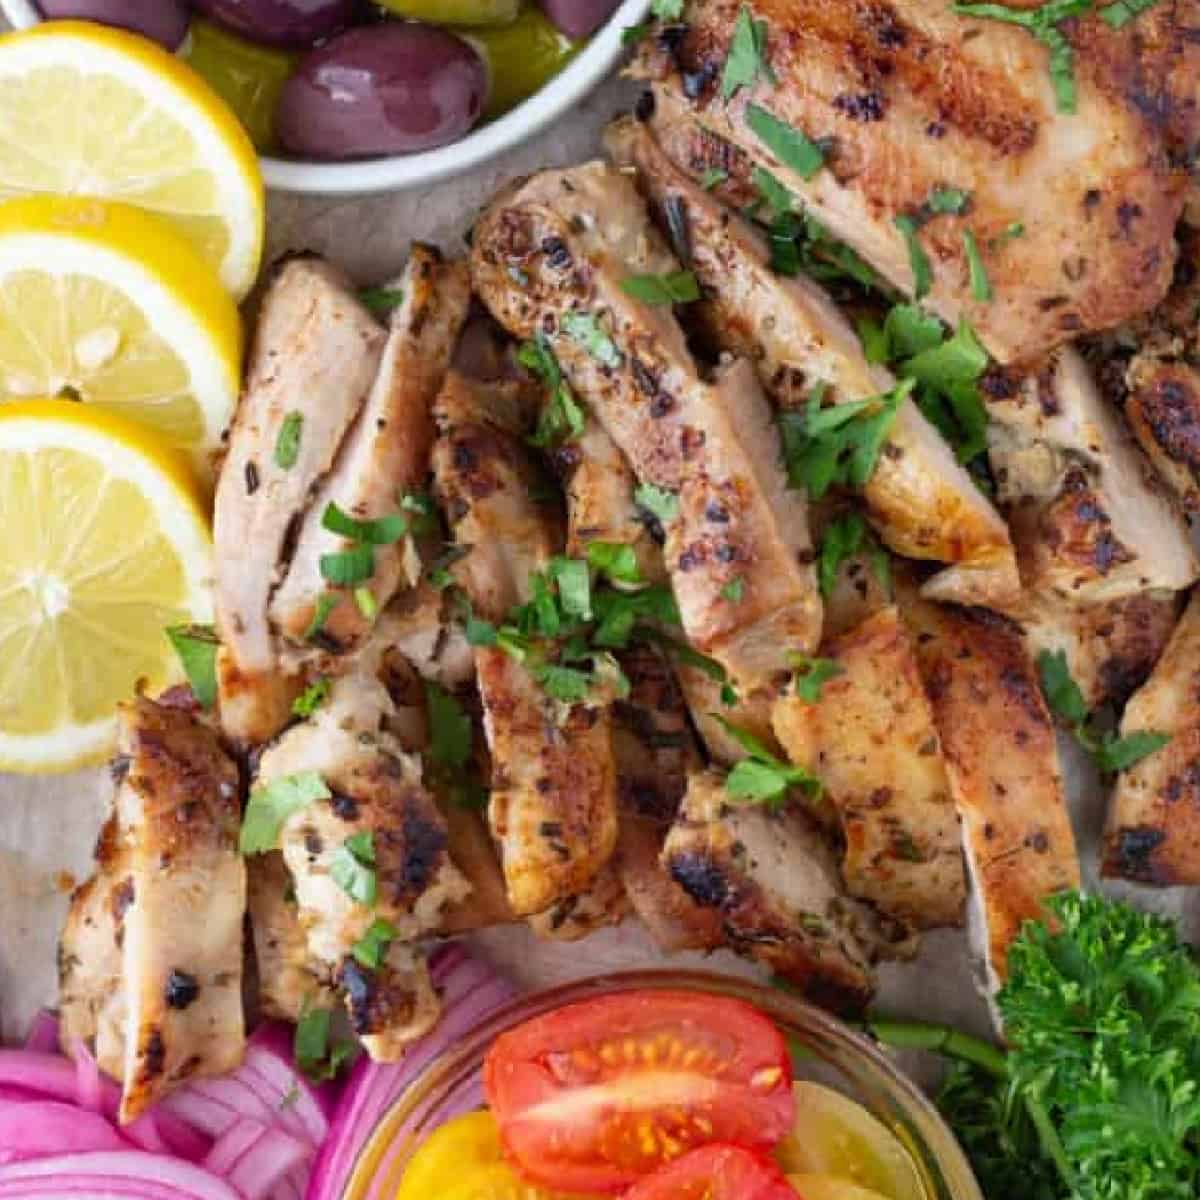 This Mediterranean style garlic chicken recipe is a keeper. Juicy chicken flavored with garlic and Mediterranean herbs is absolutely delicious.
